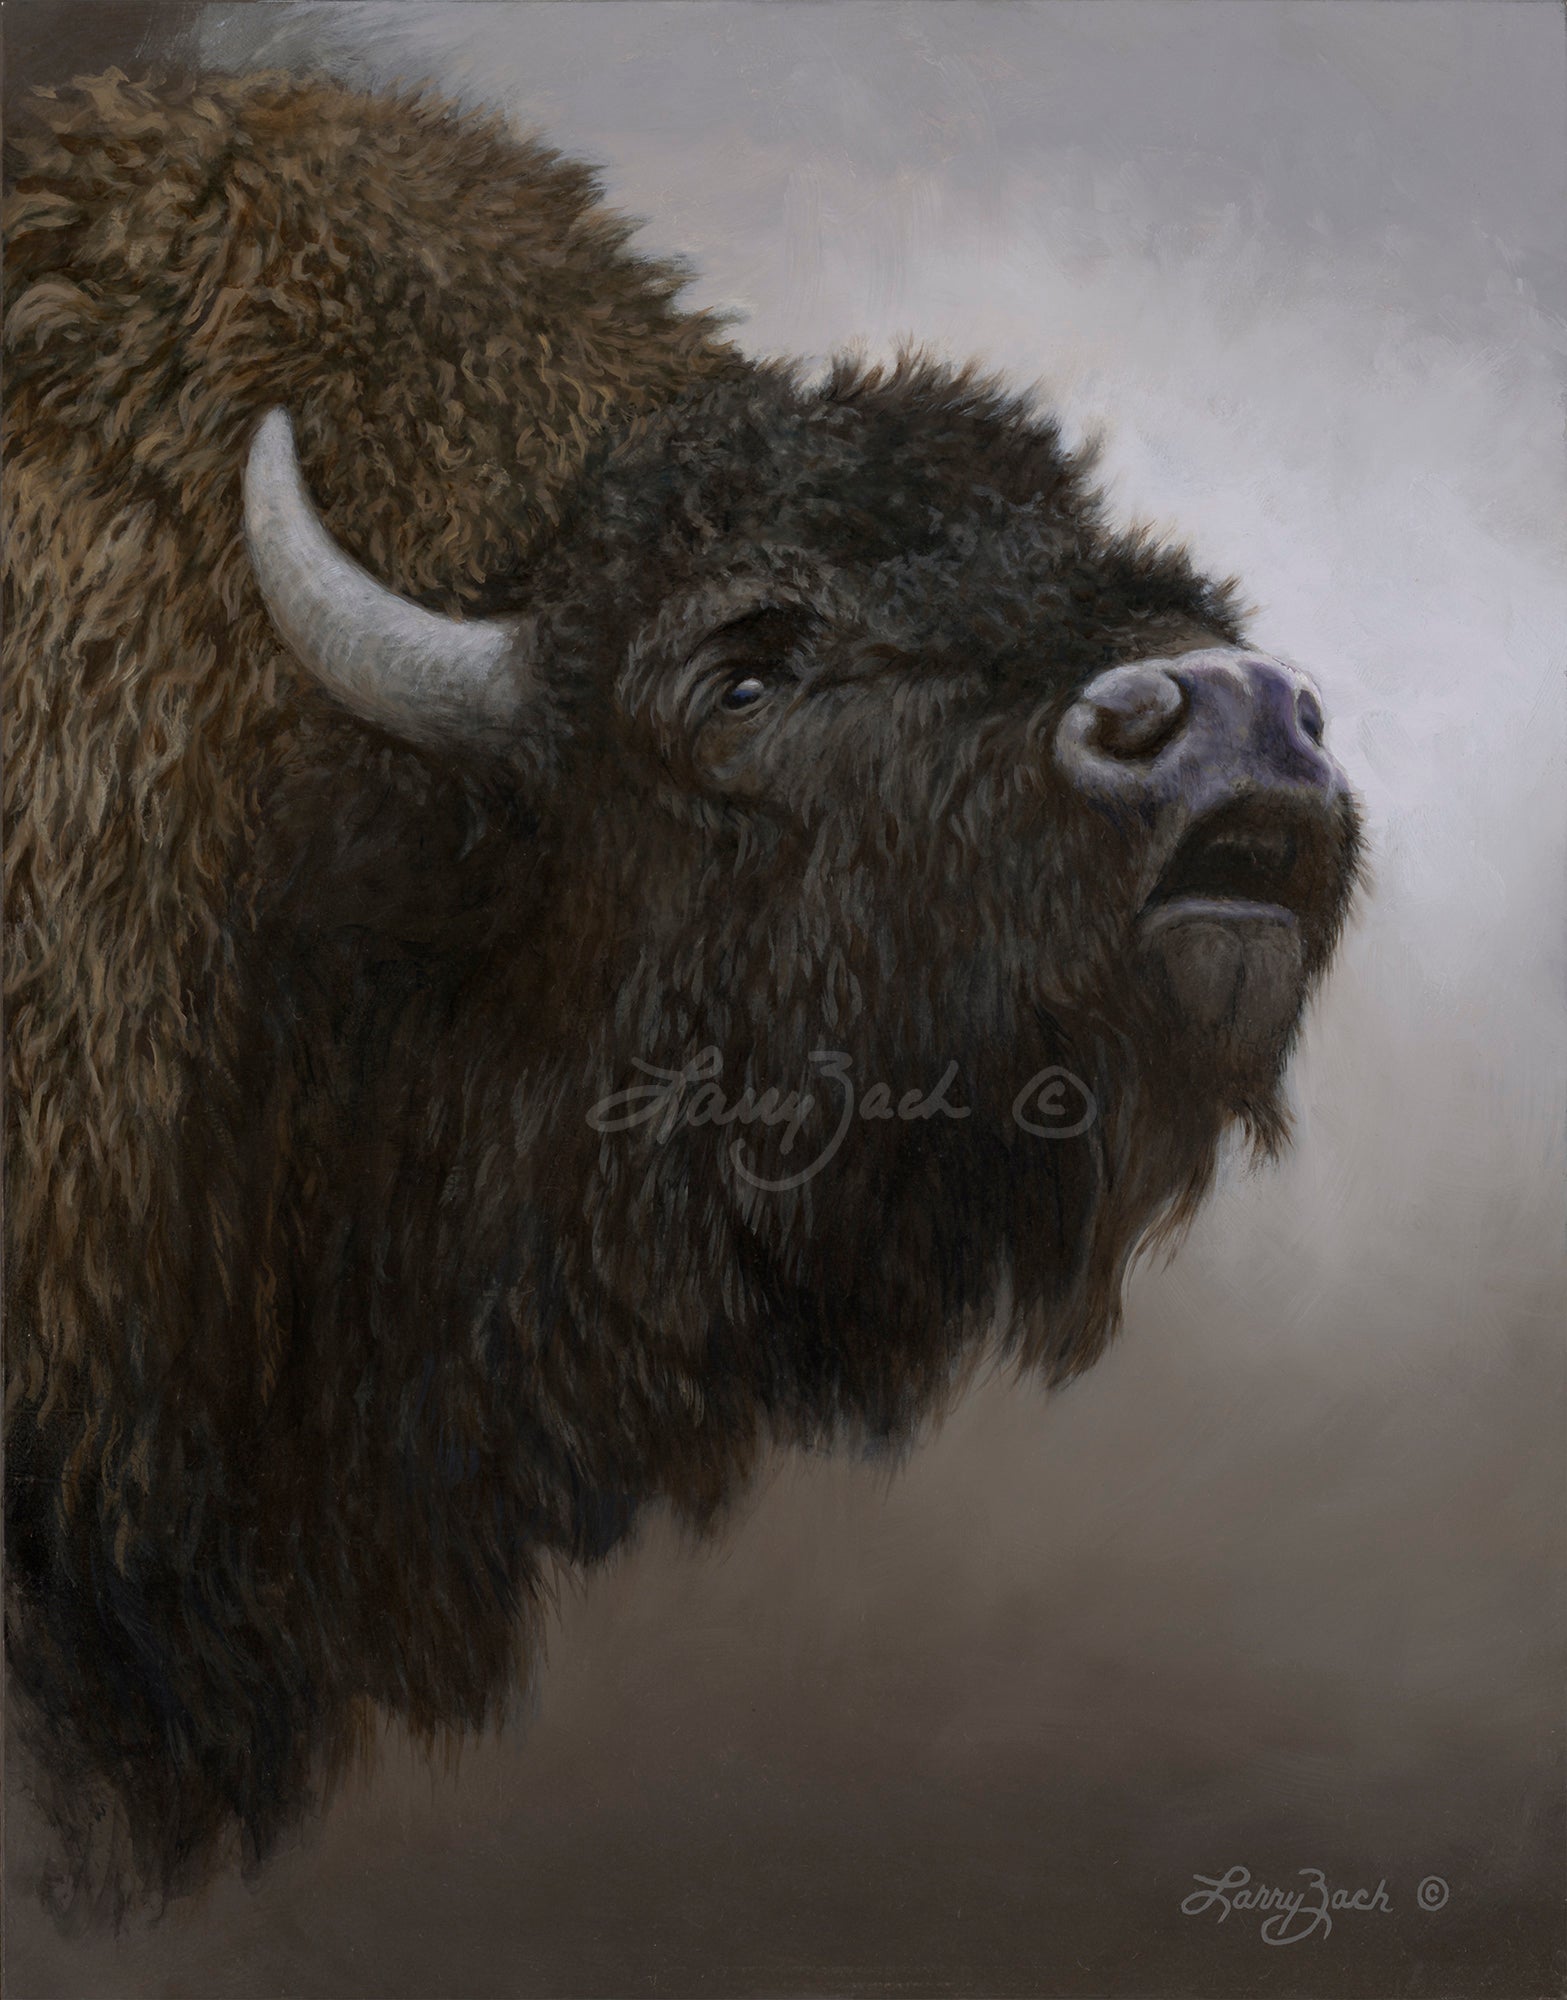 Portraits in Gray – American Bison